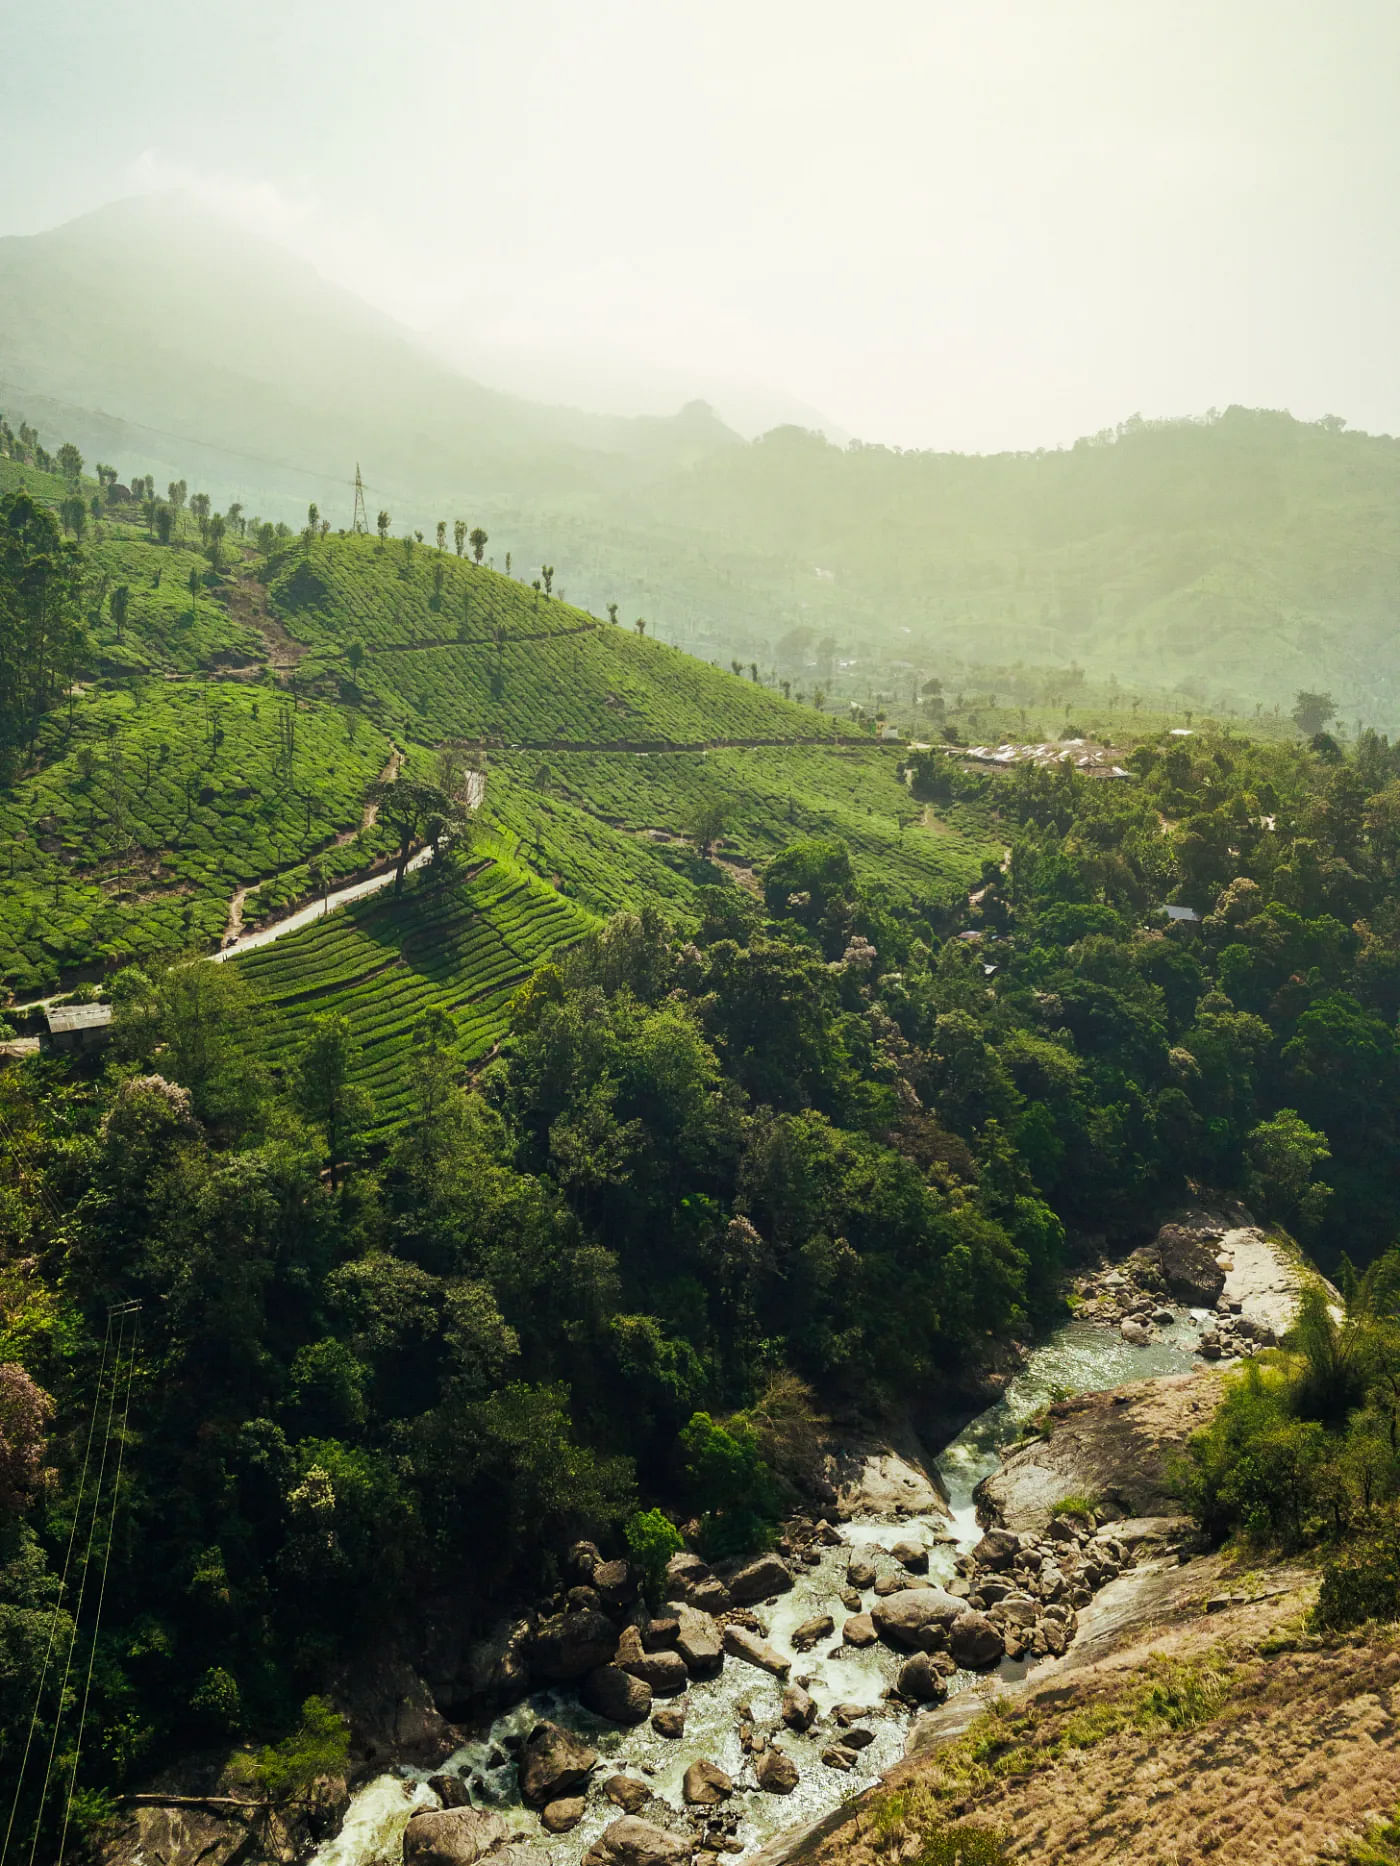 Hike through the Valleys, Plantations and Peaks of Munnar!